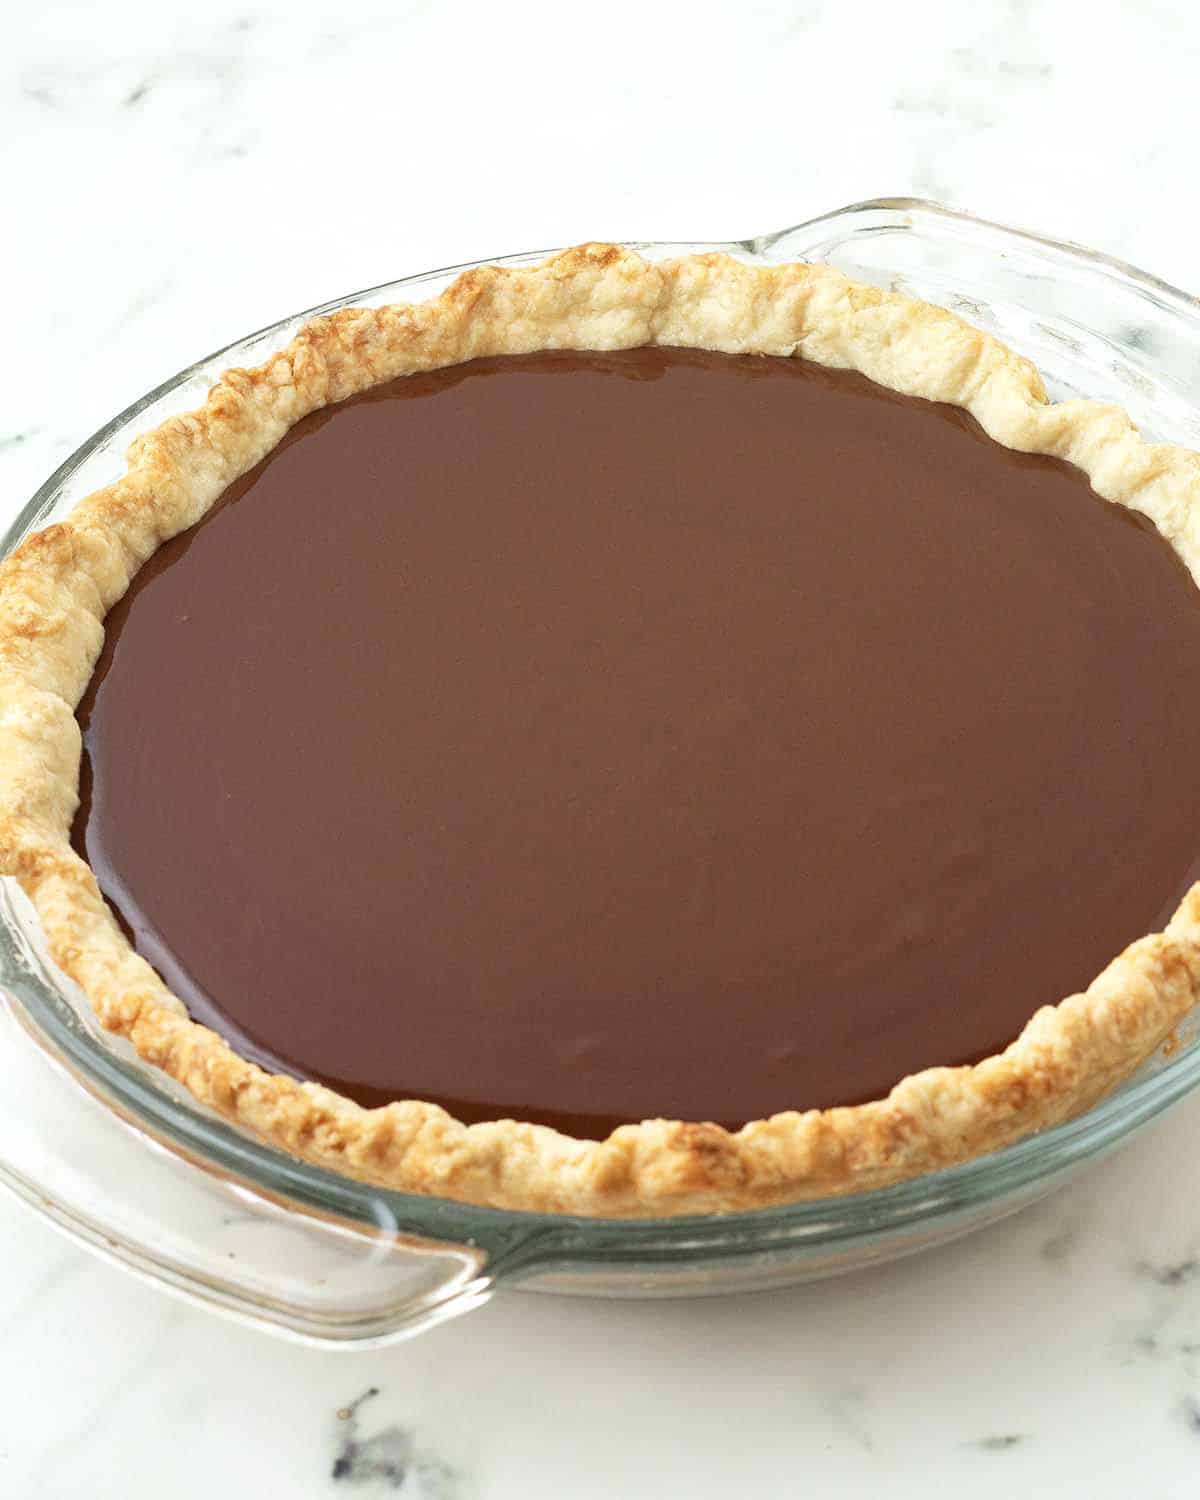 Chocolate pie filling sitting in a pre-baked pie crust, the filling is still liquid because it has not been chilled yet.